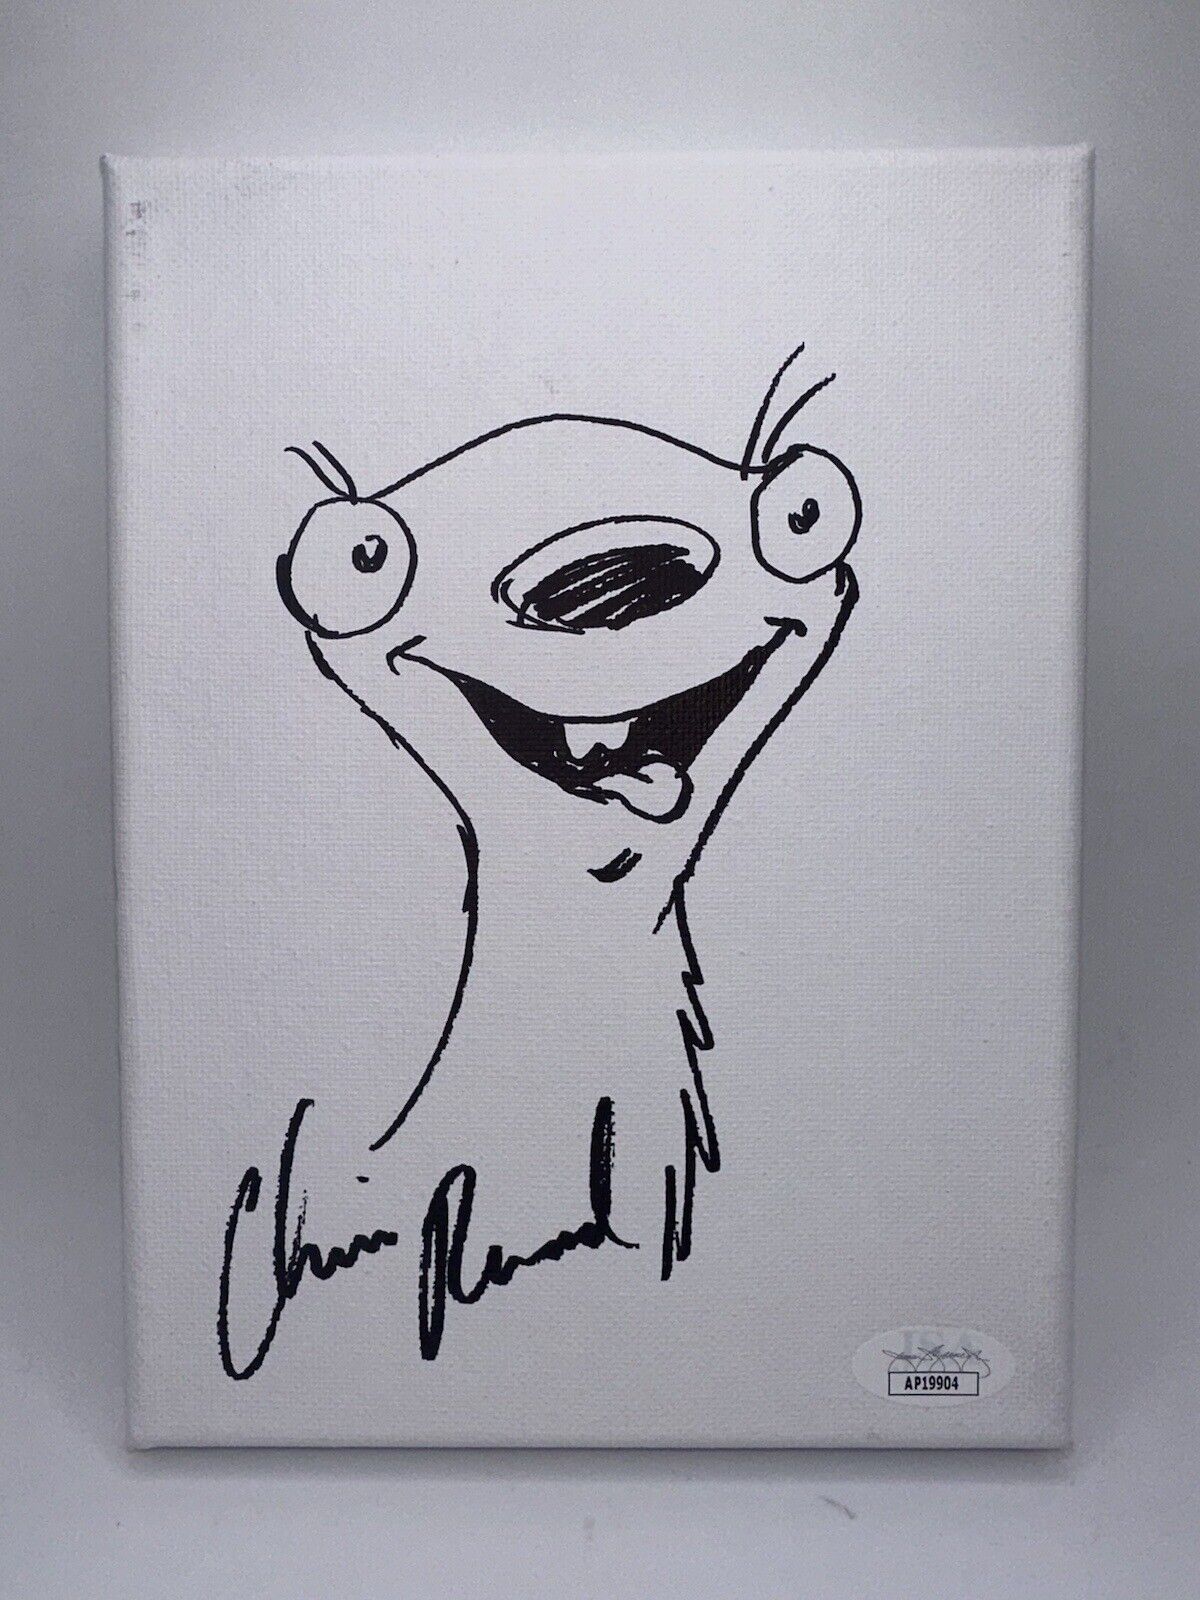 Chris Renaud Hand Signed & Sketched Stretched Canvas 6x8 Ice Age JSA COA